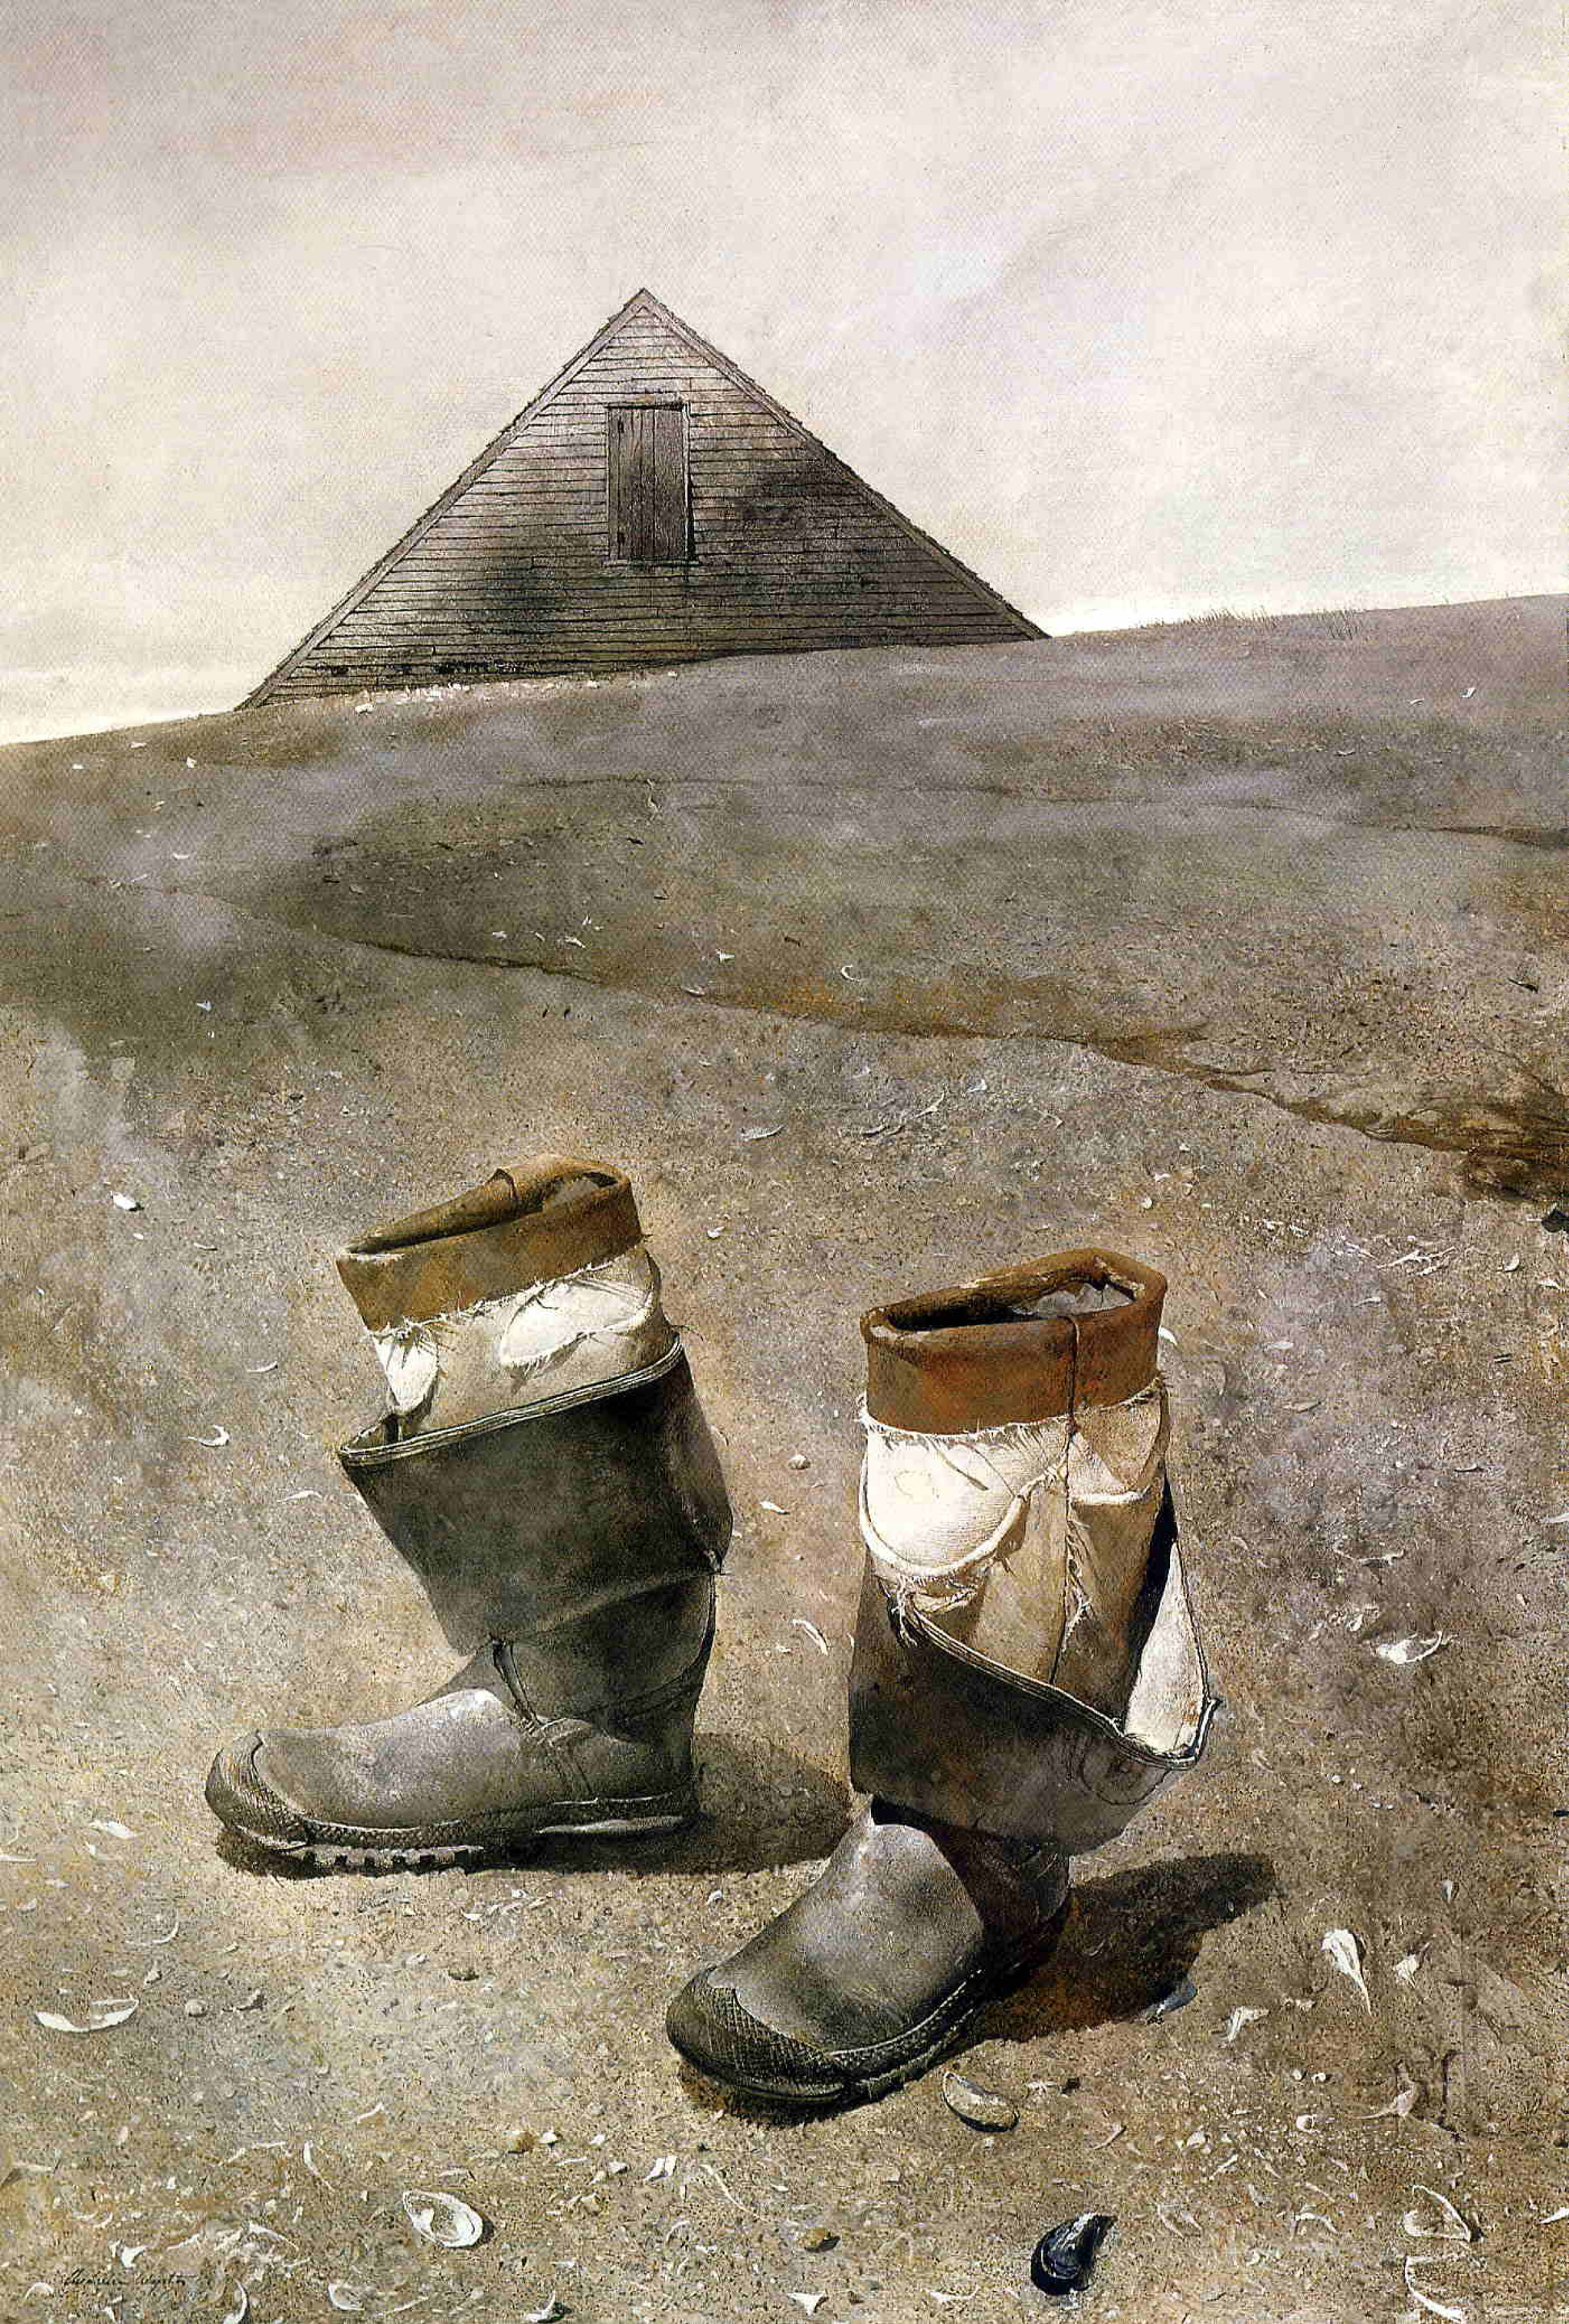 Why did this picture become legendary? - Art history, Artist, Andrew Wyeth, Longpost, Accordion